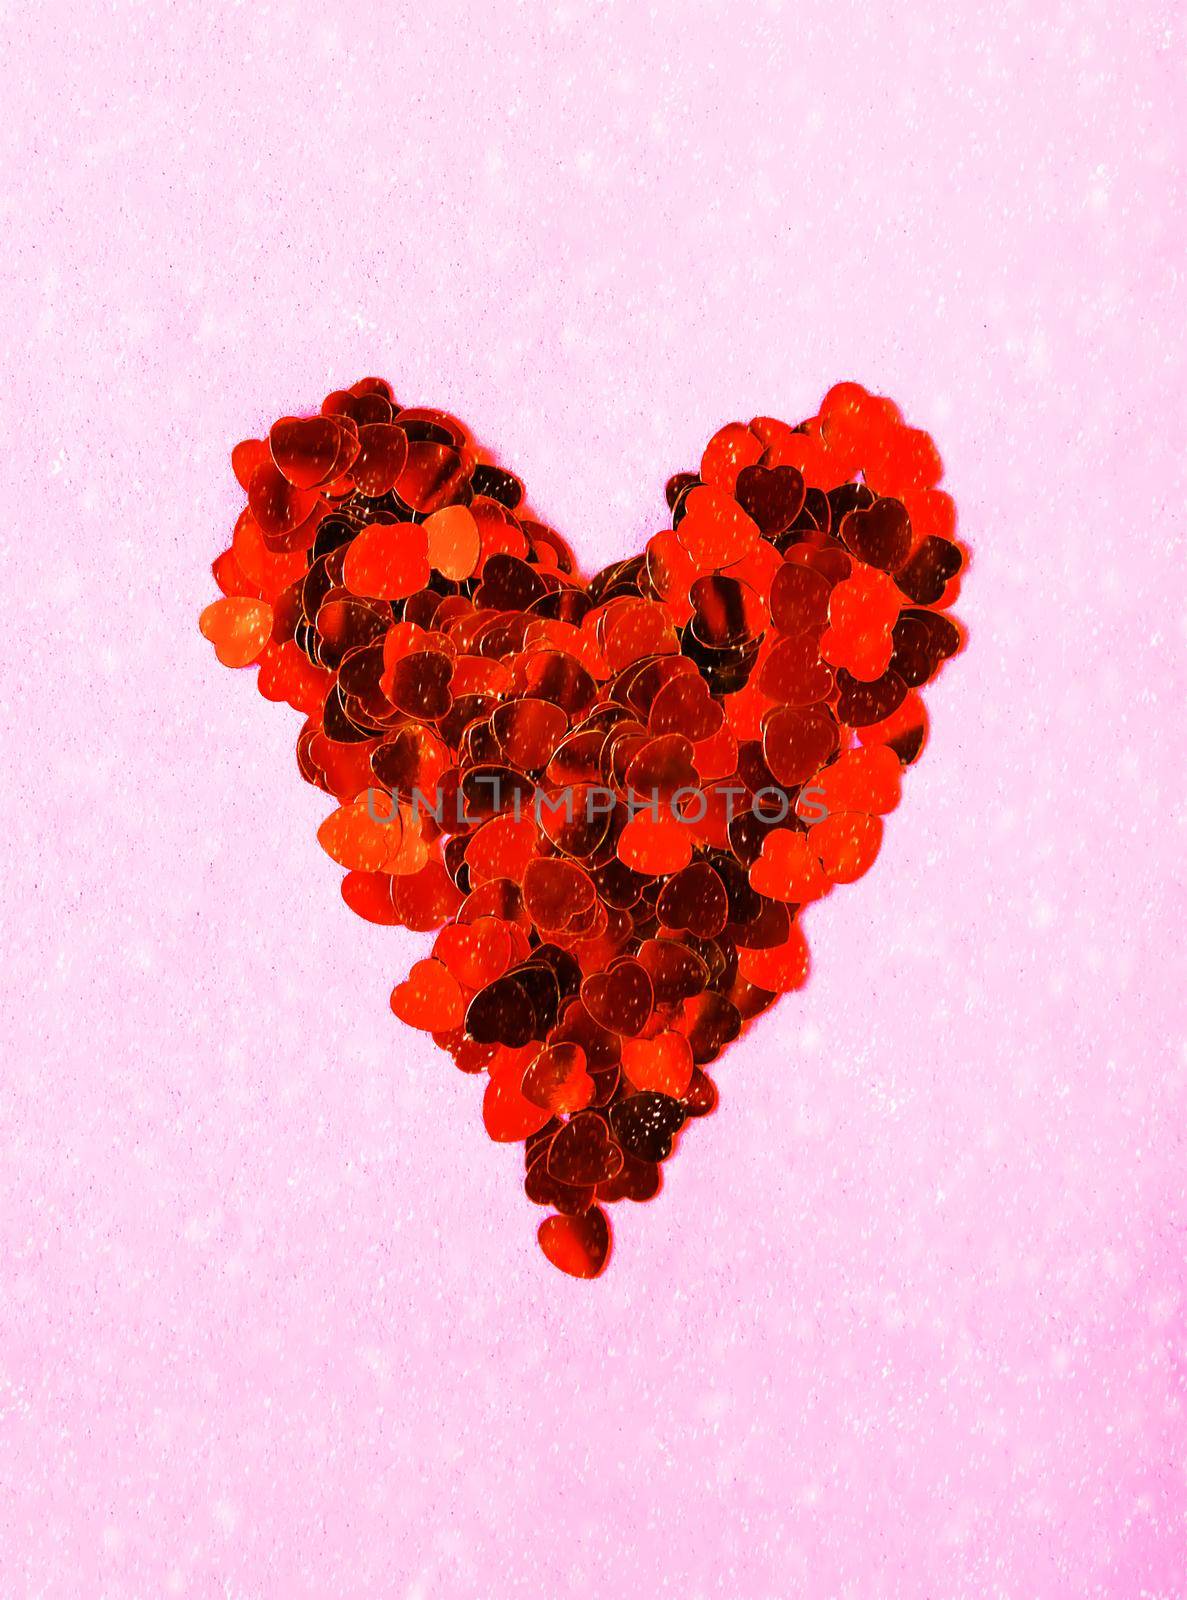 Valentine's day decorative background with heart made of tinsel. Snowfall effect on soft pink background.